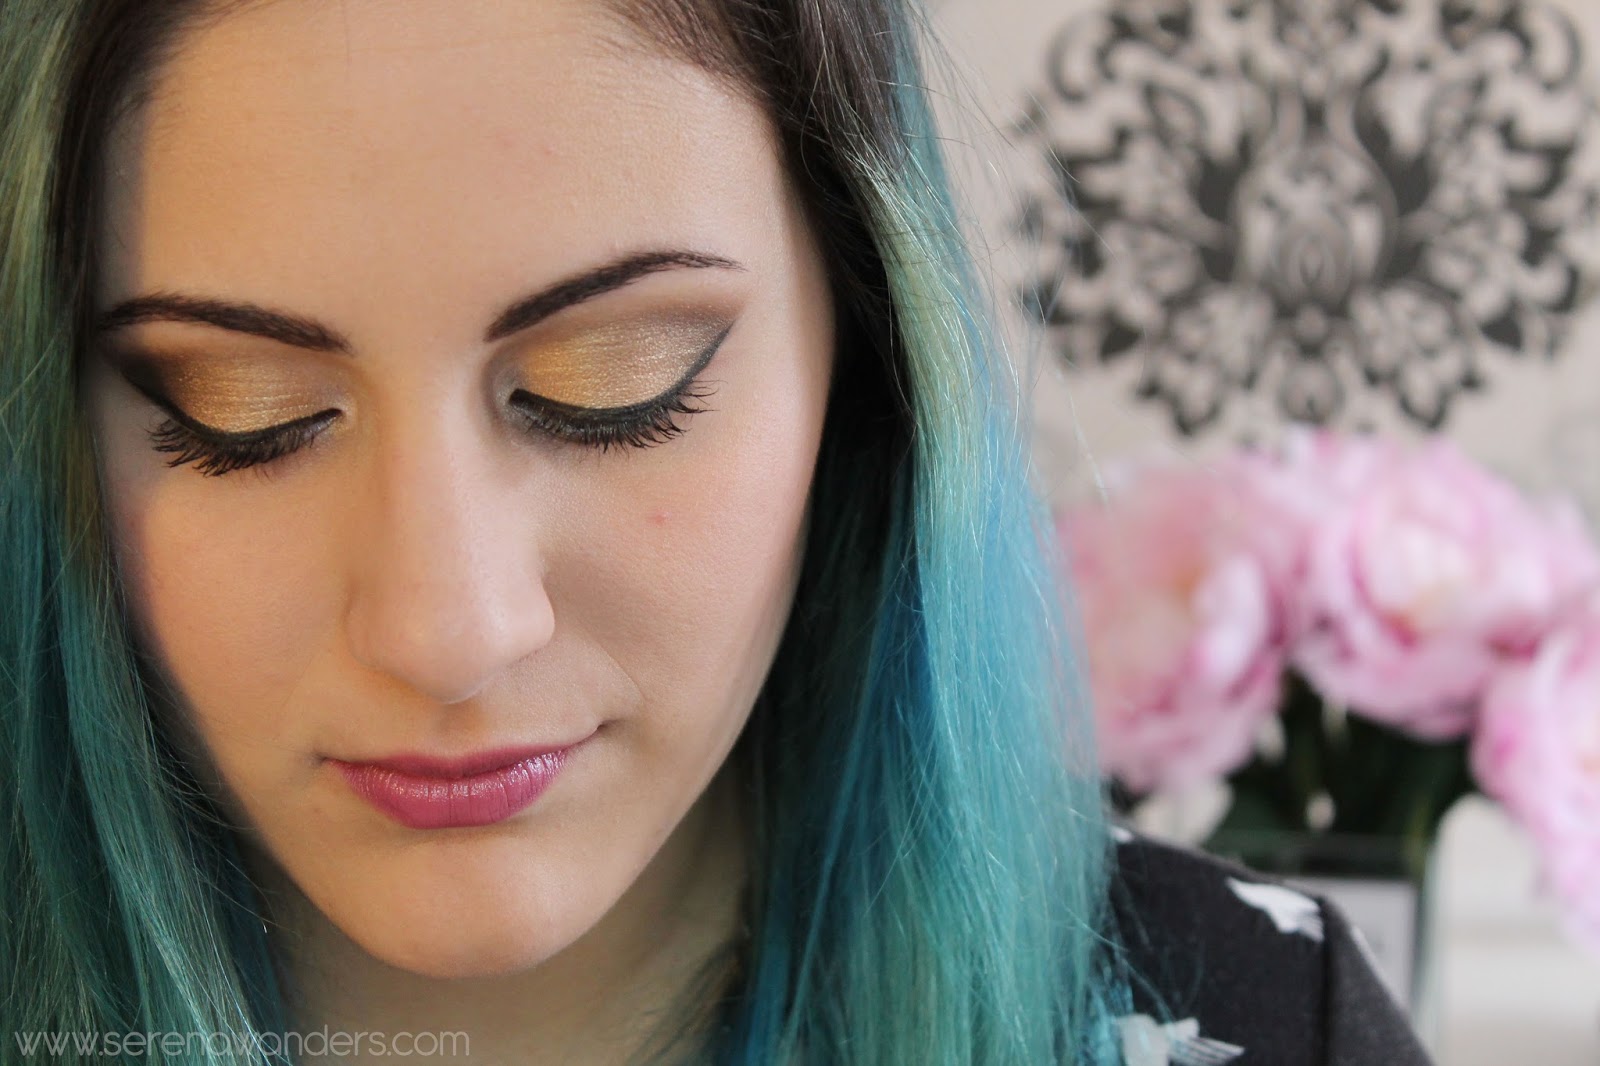 Serena Wanders Makeup Tutorial With The NAKED PALETTE Soft And